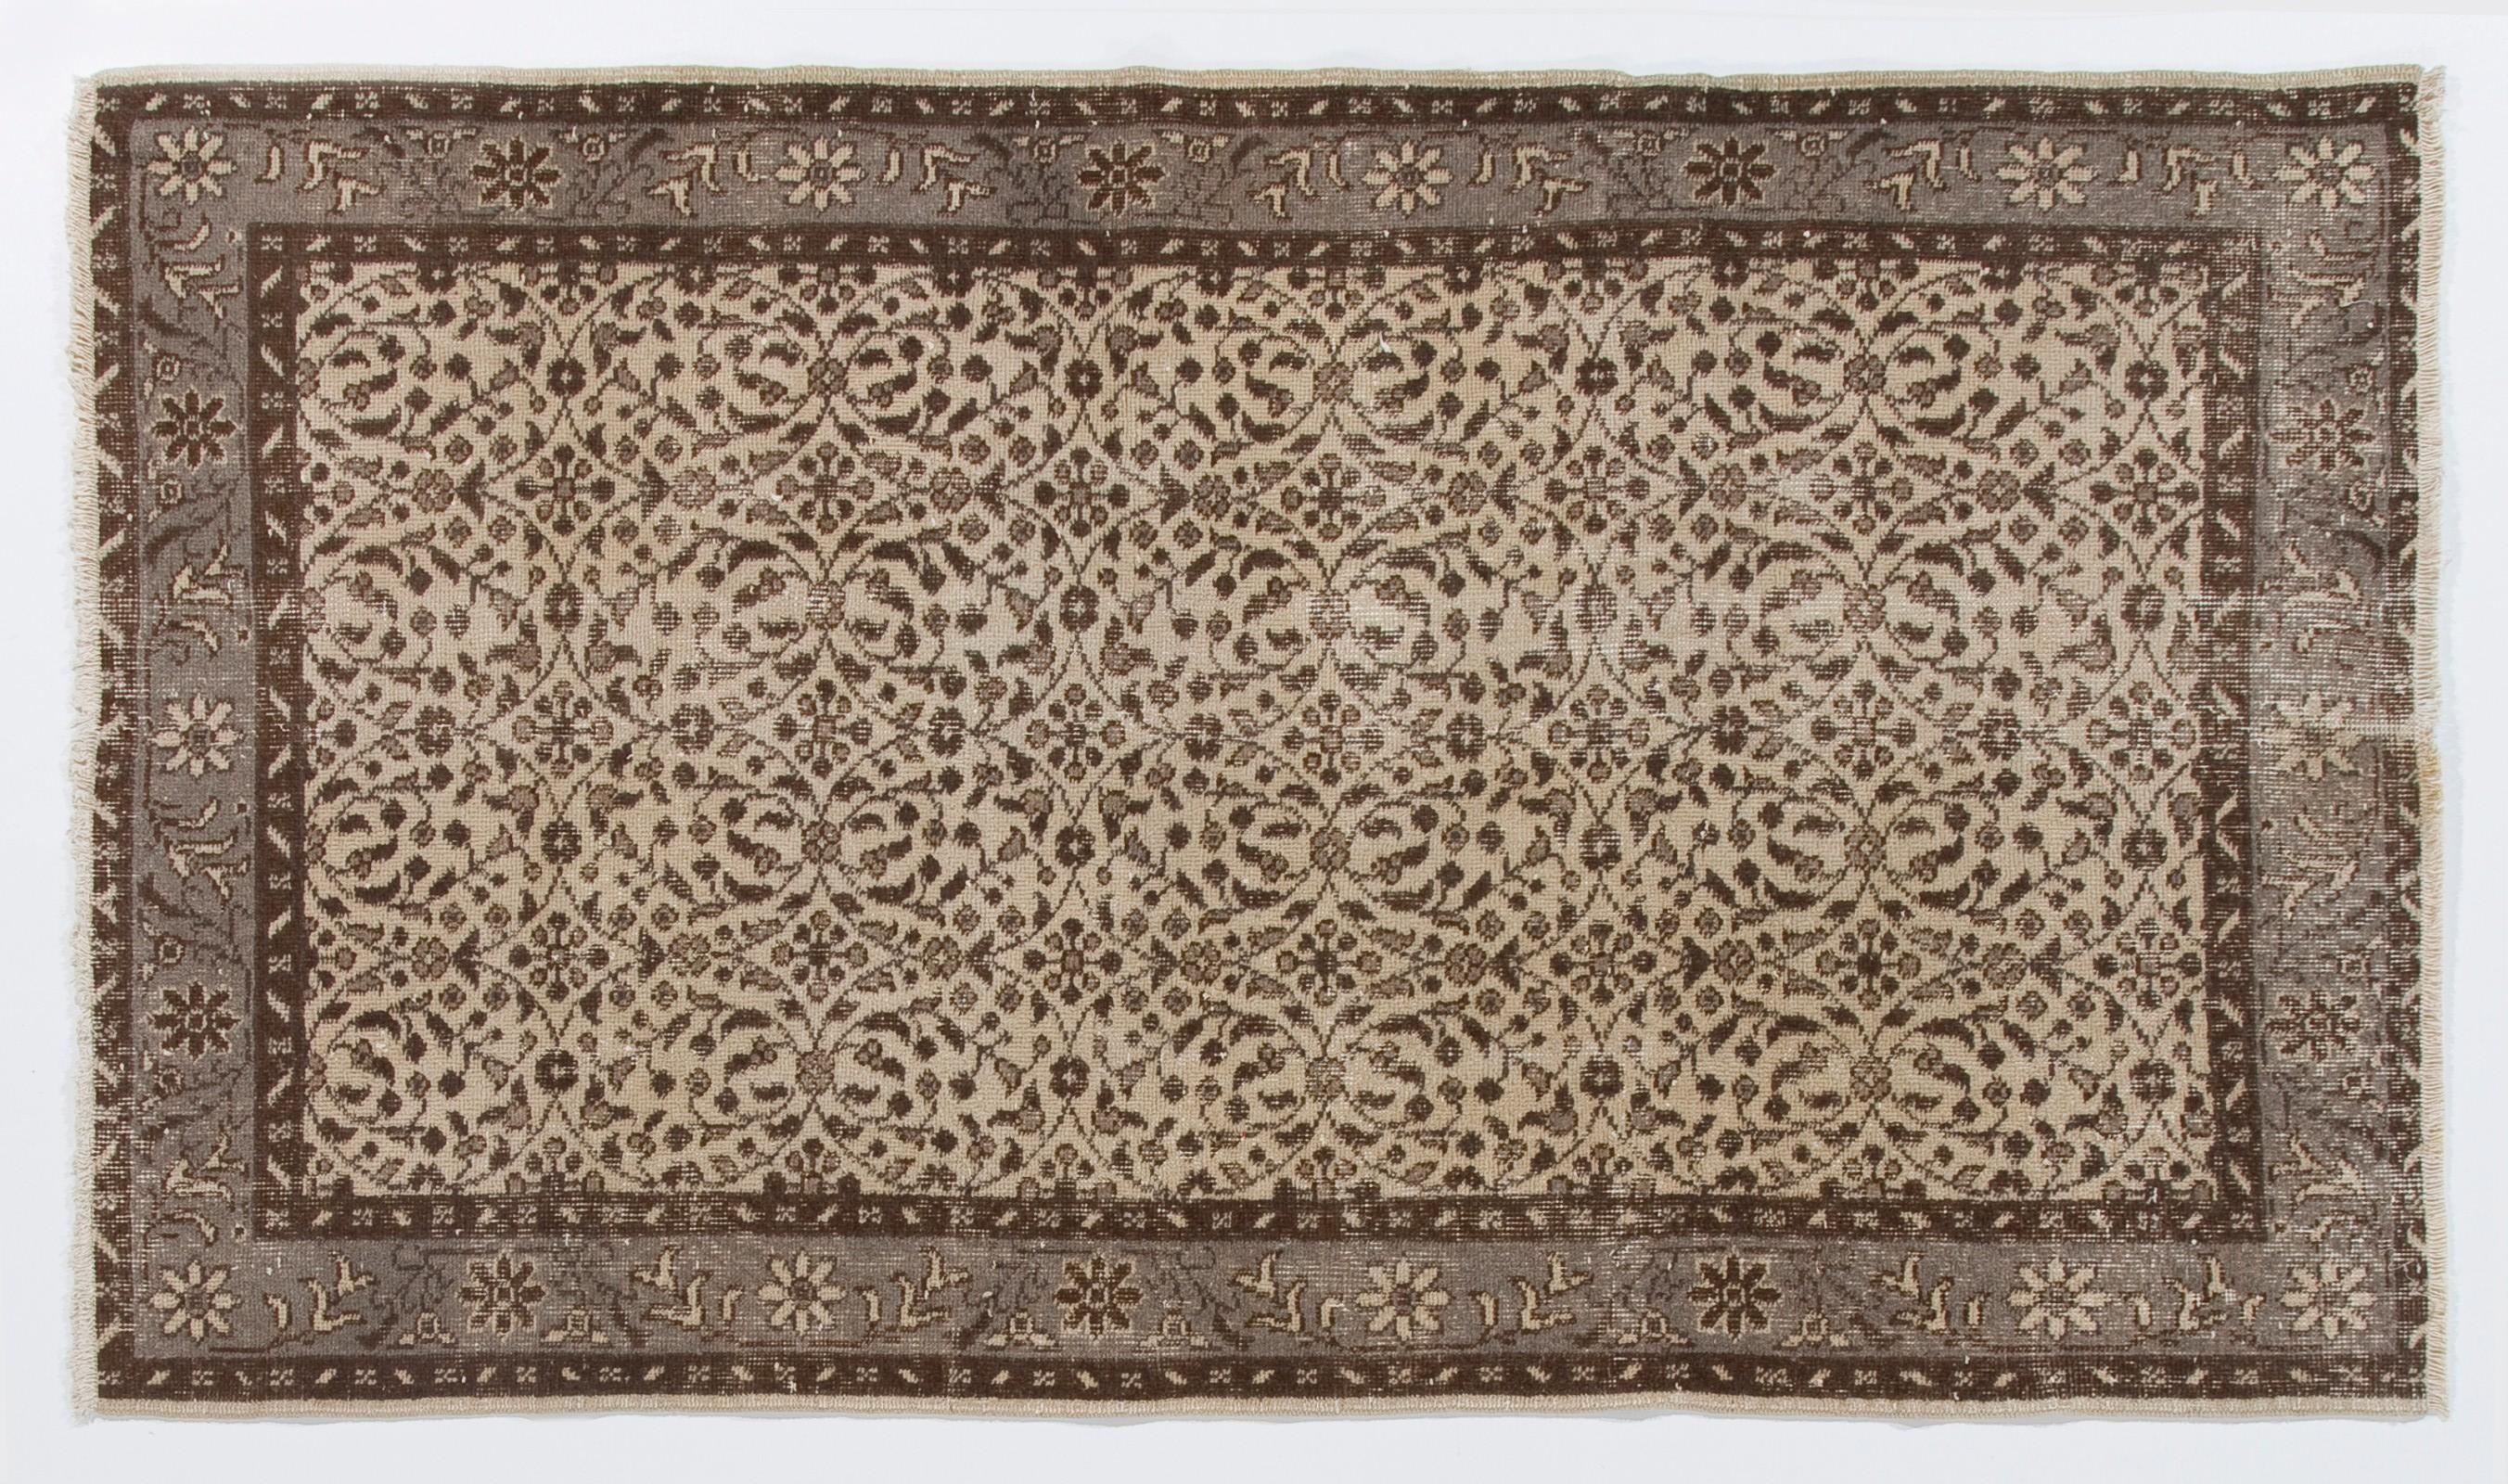 20th Century Handmade Vintage Turkish Oushak Accent Rug with All-Over Floral Design 4x6.8 ft For Sale